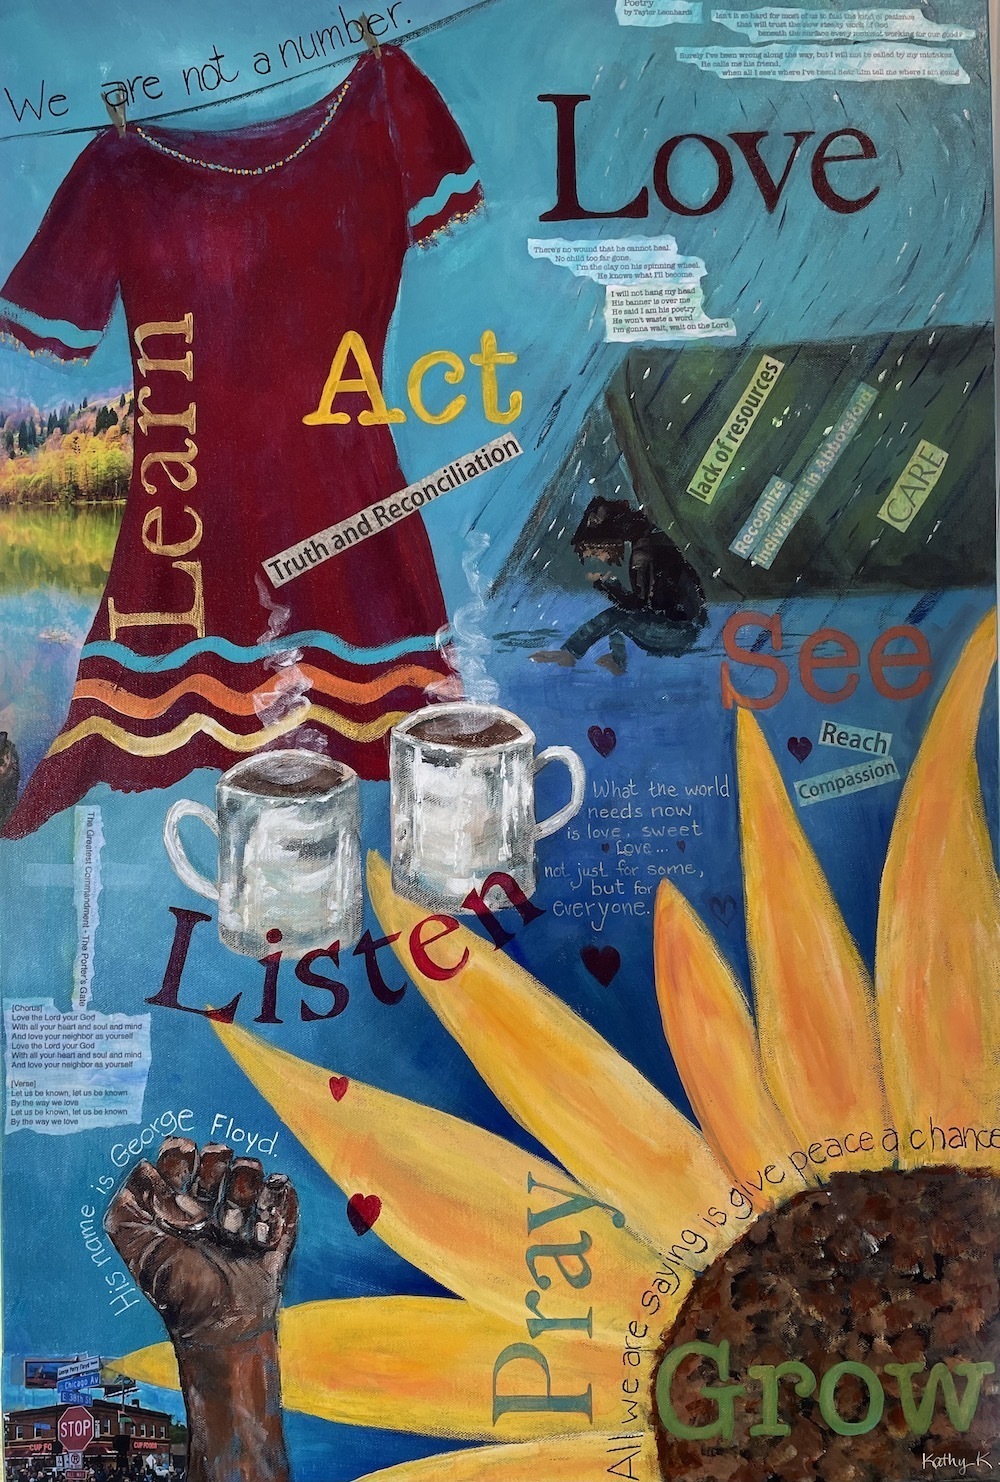 a mixed media collage image depicting peacemaking - learning acting listening praying loving